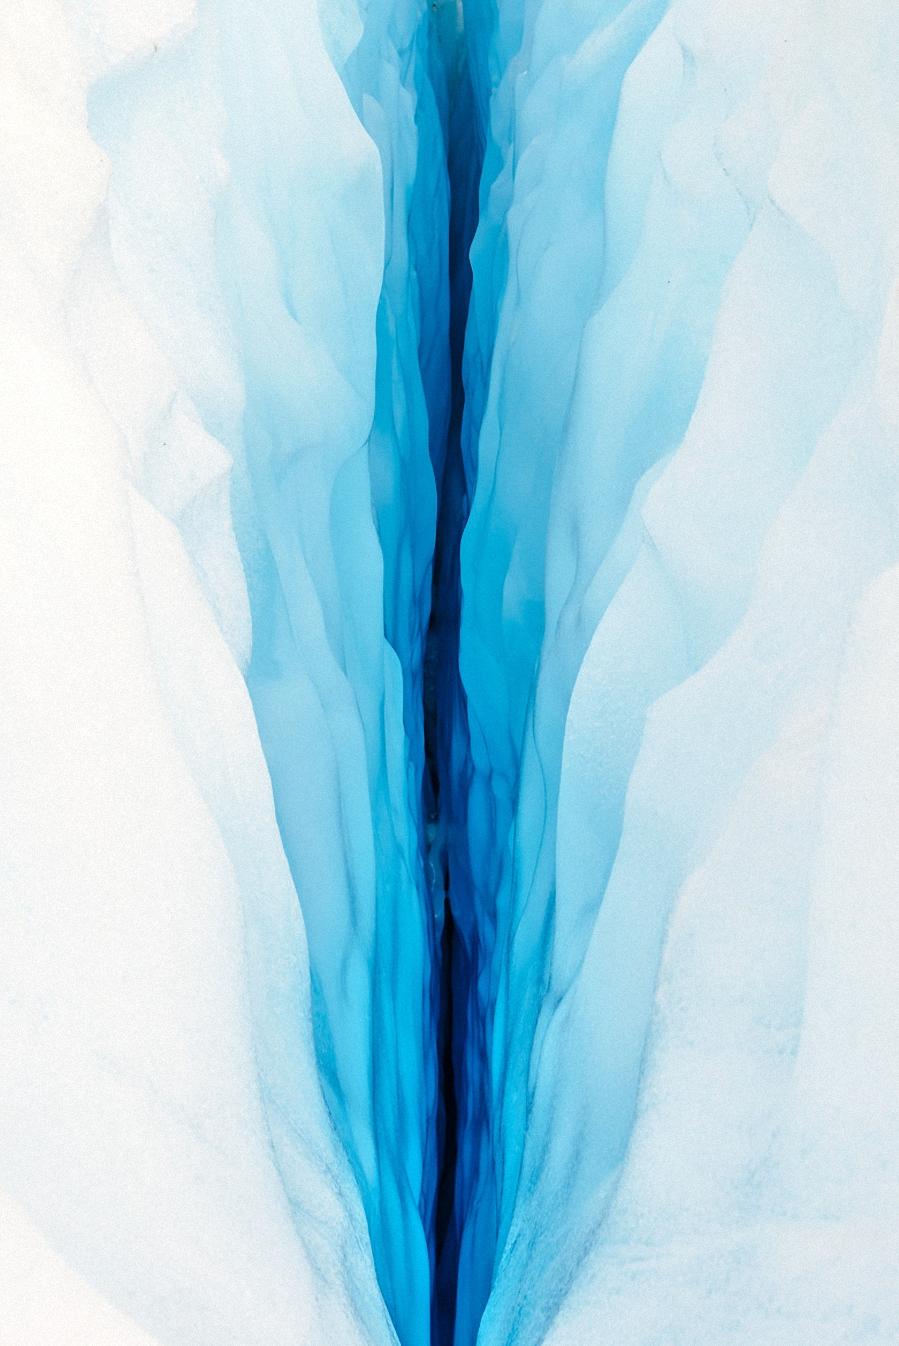 White Blue Ice Chasm Wallpaper - Ice Cave , HD Wallpaper & Backgrounds